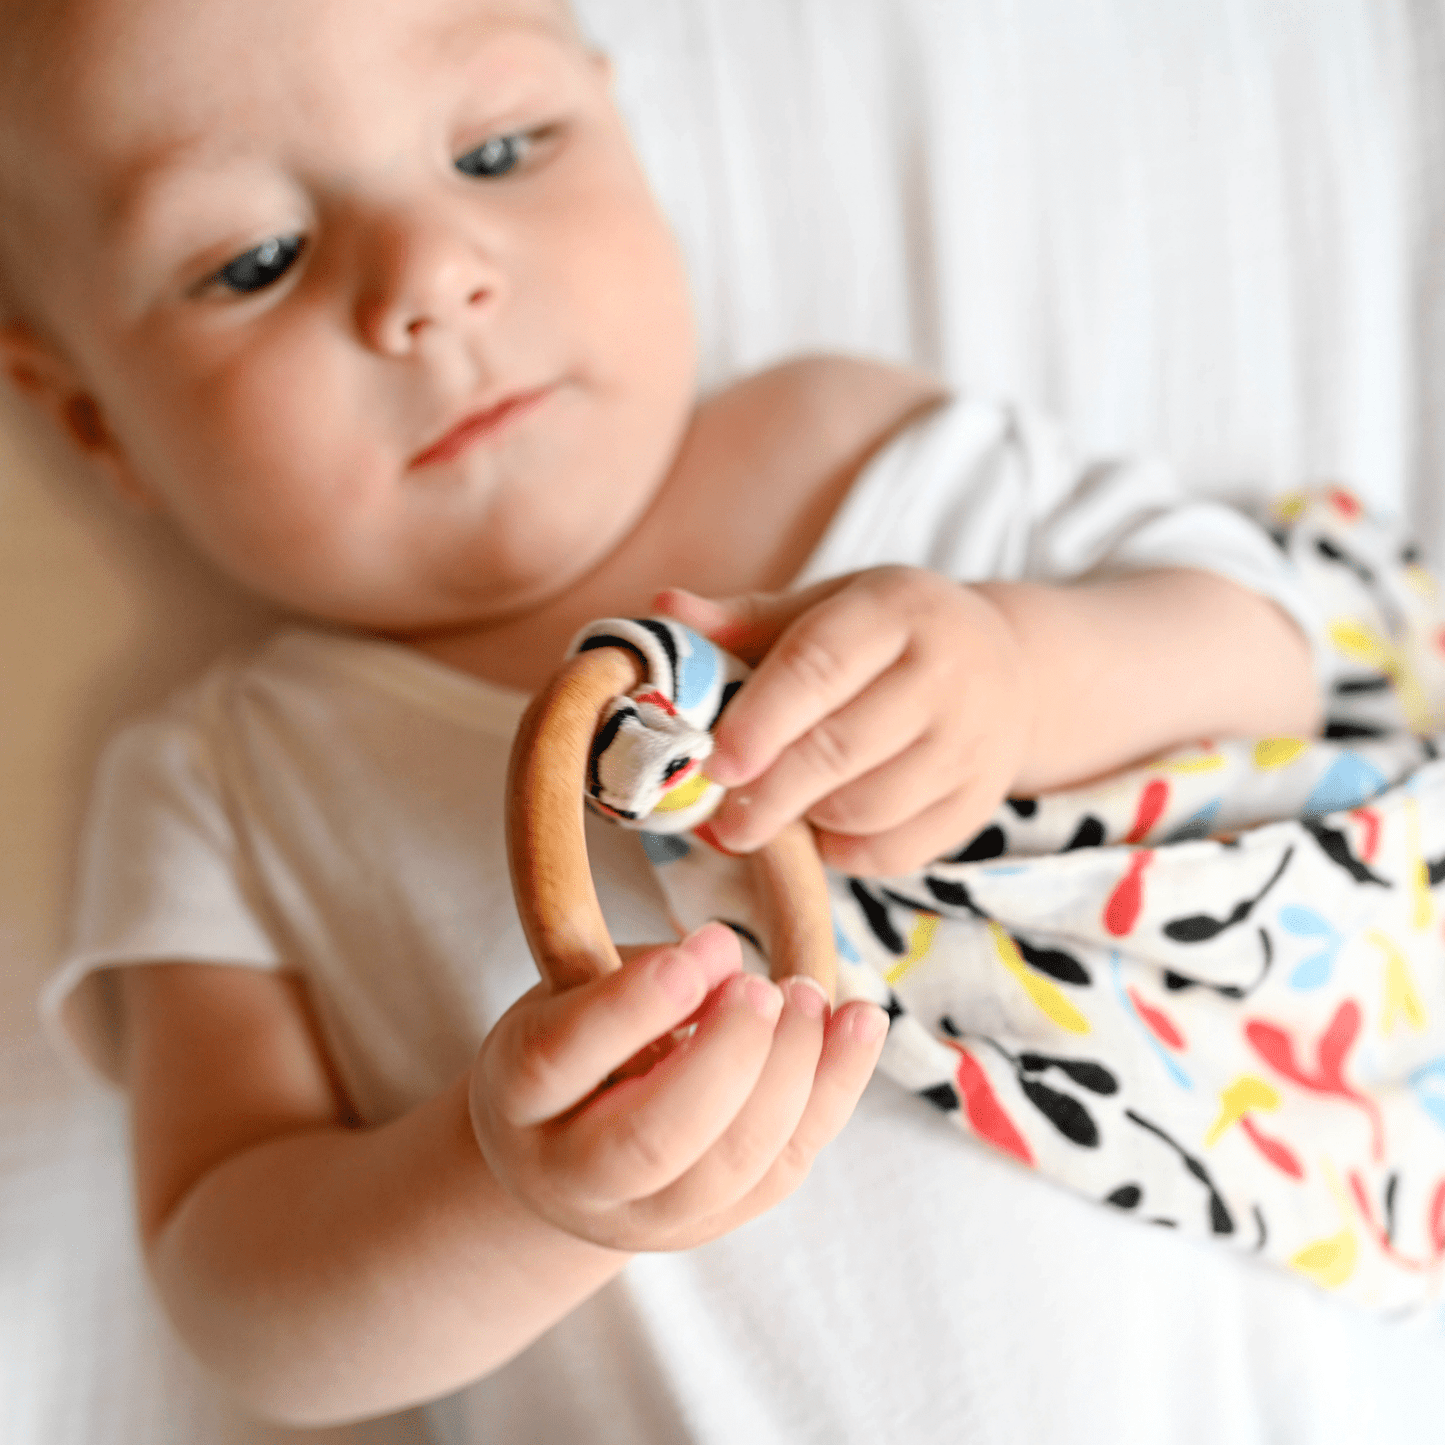 The Etta loves sycamore teething comforter is available from Alf & Co, the children’s independent 